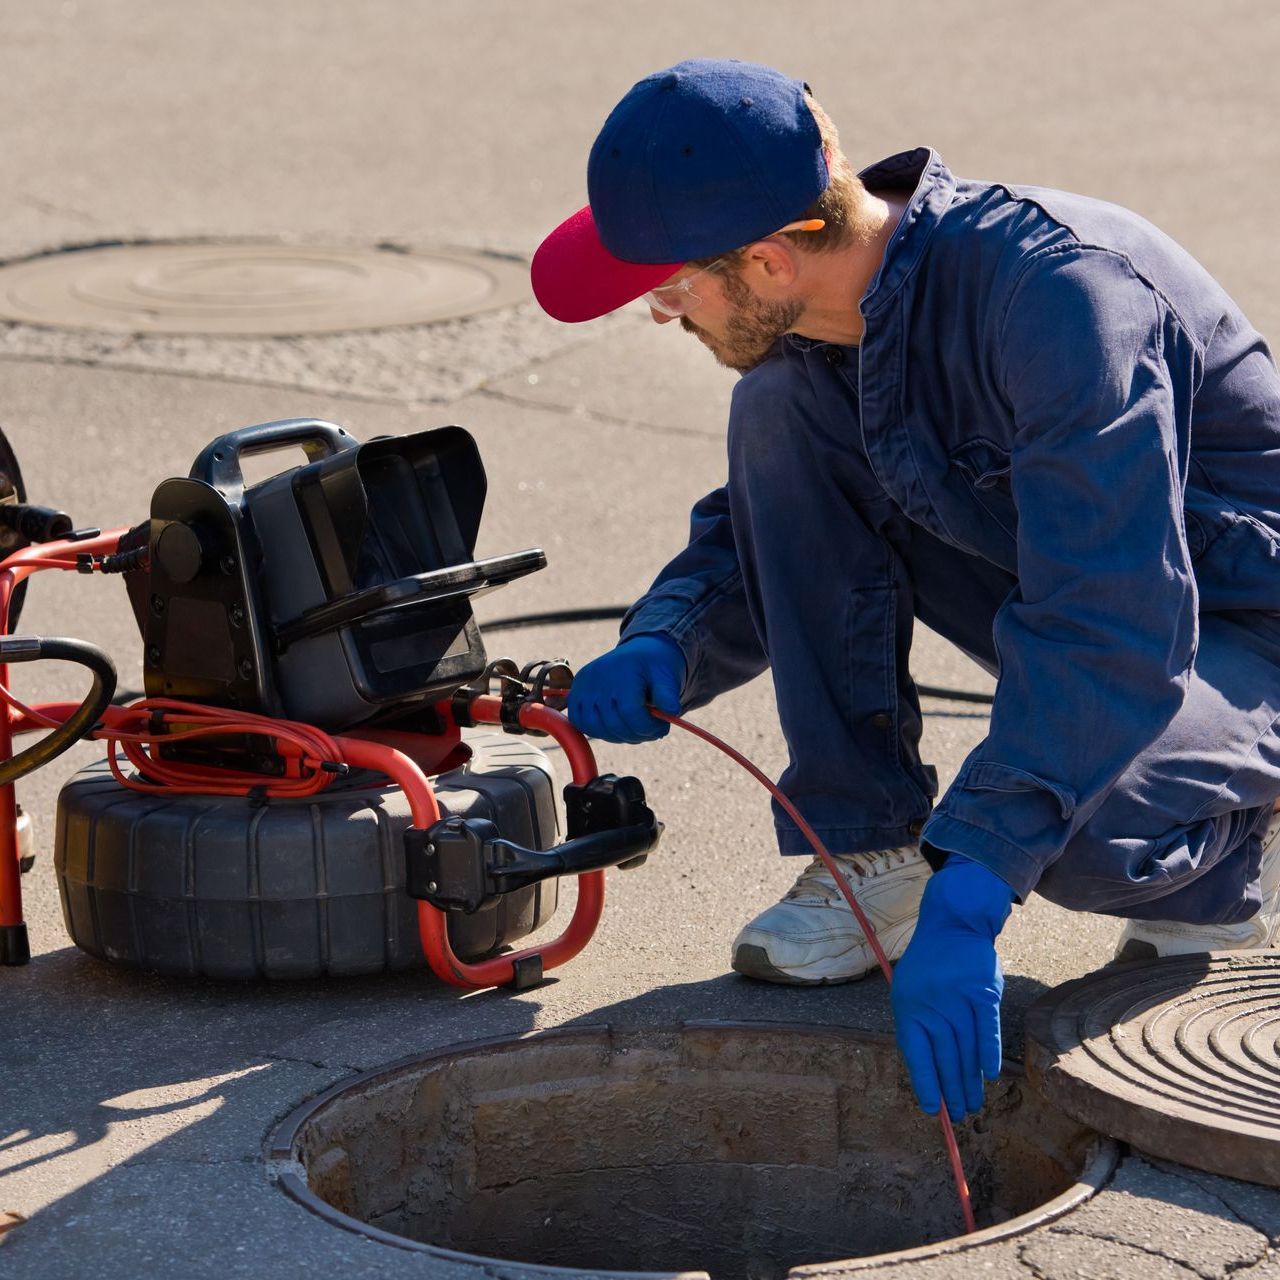 a man is working on a manhole cover with a camera attached to it